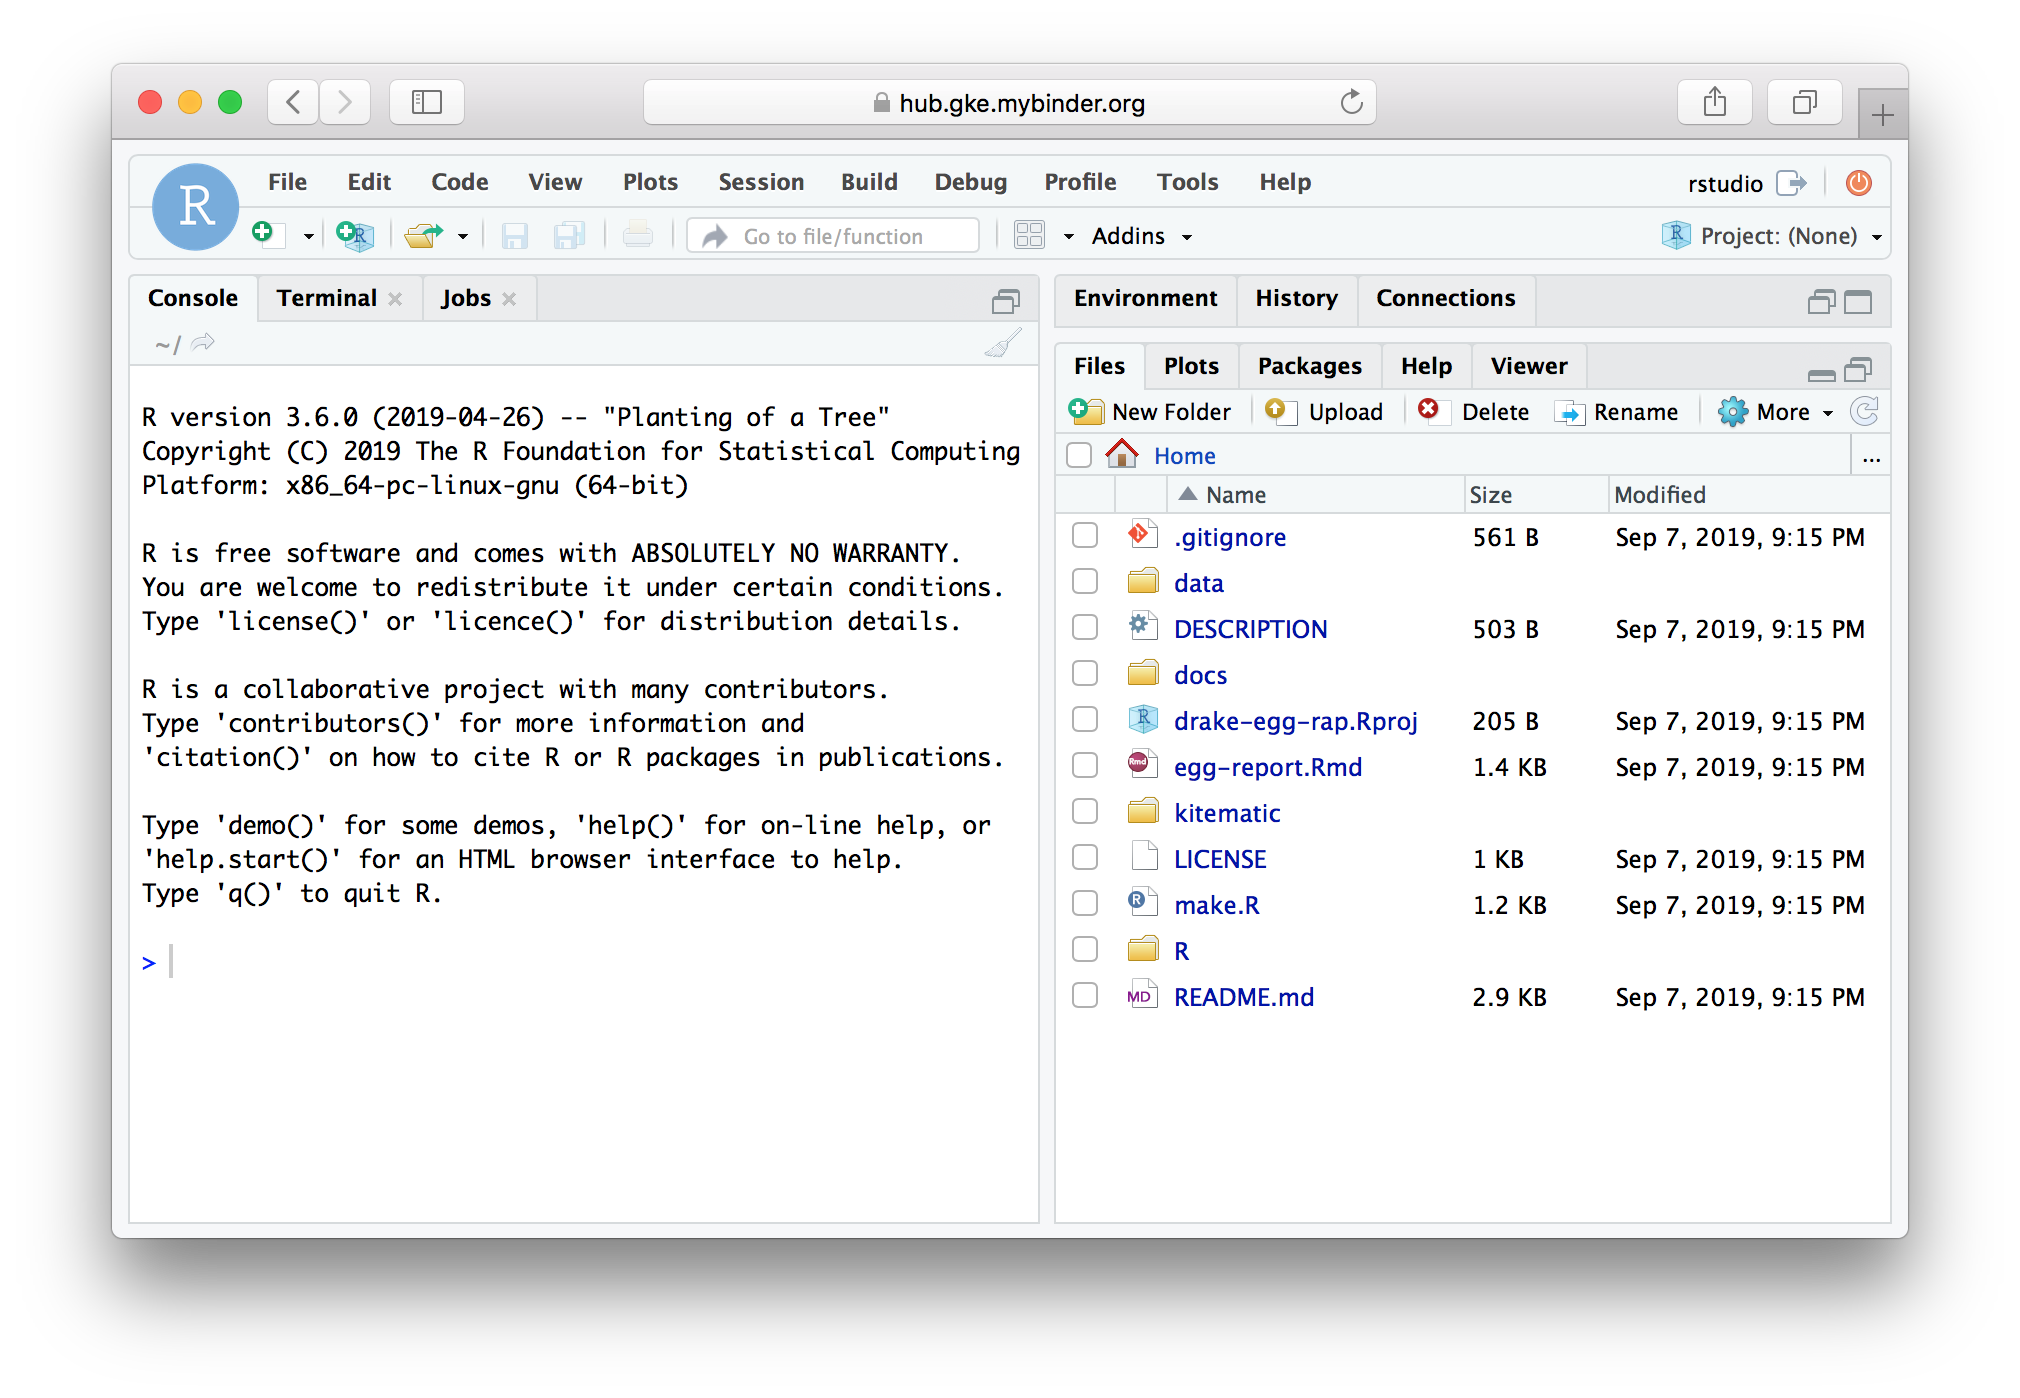 RStudio in a browser window, showing R's start-up text in the console pane and the contents of the home folder in the files pane.